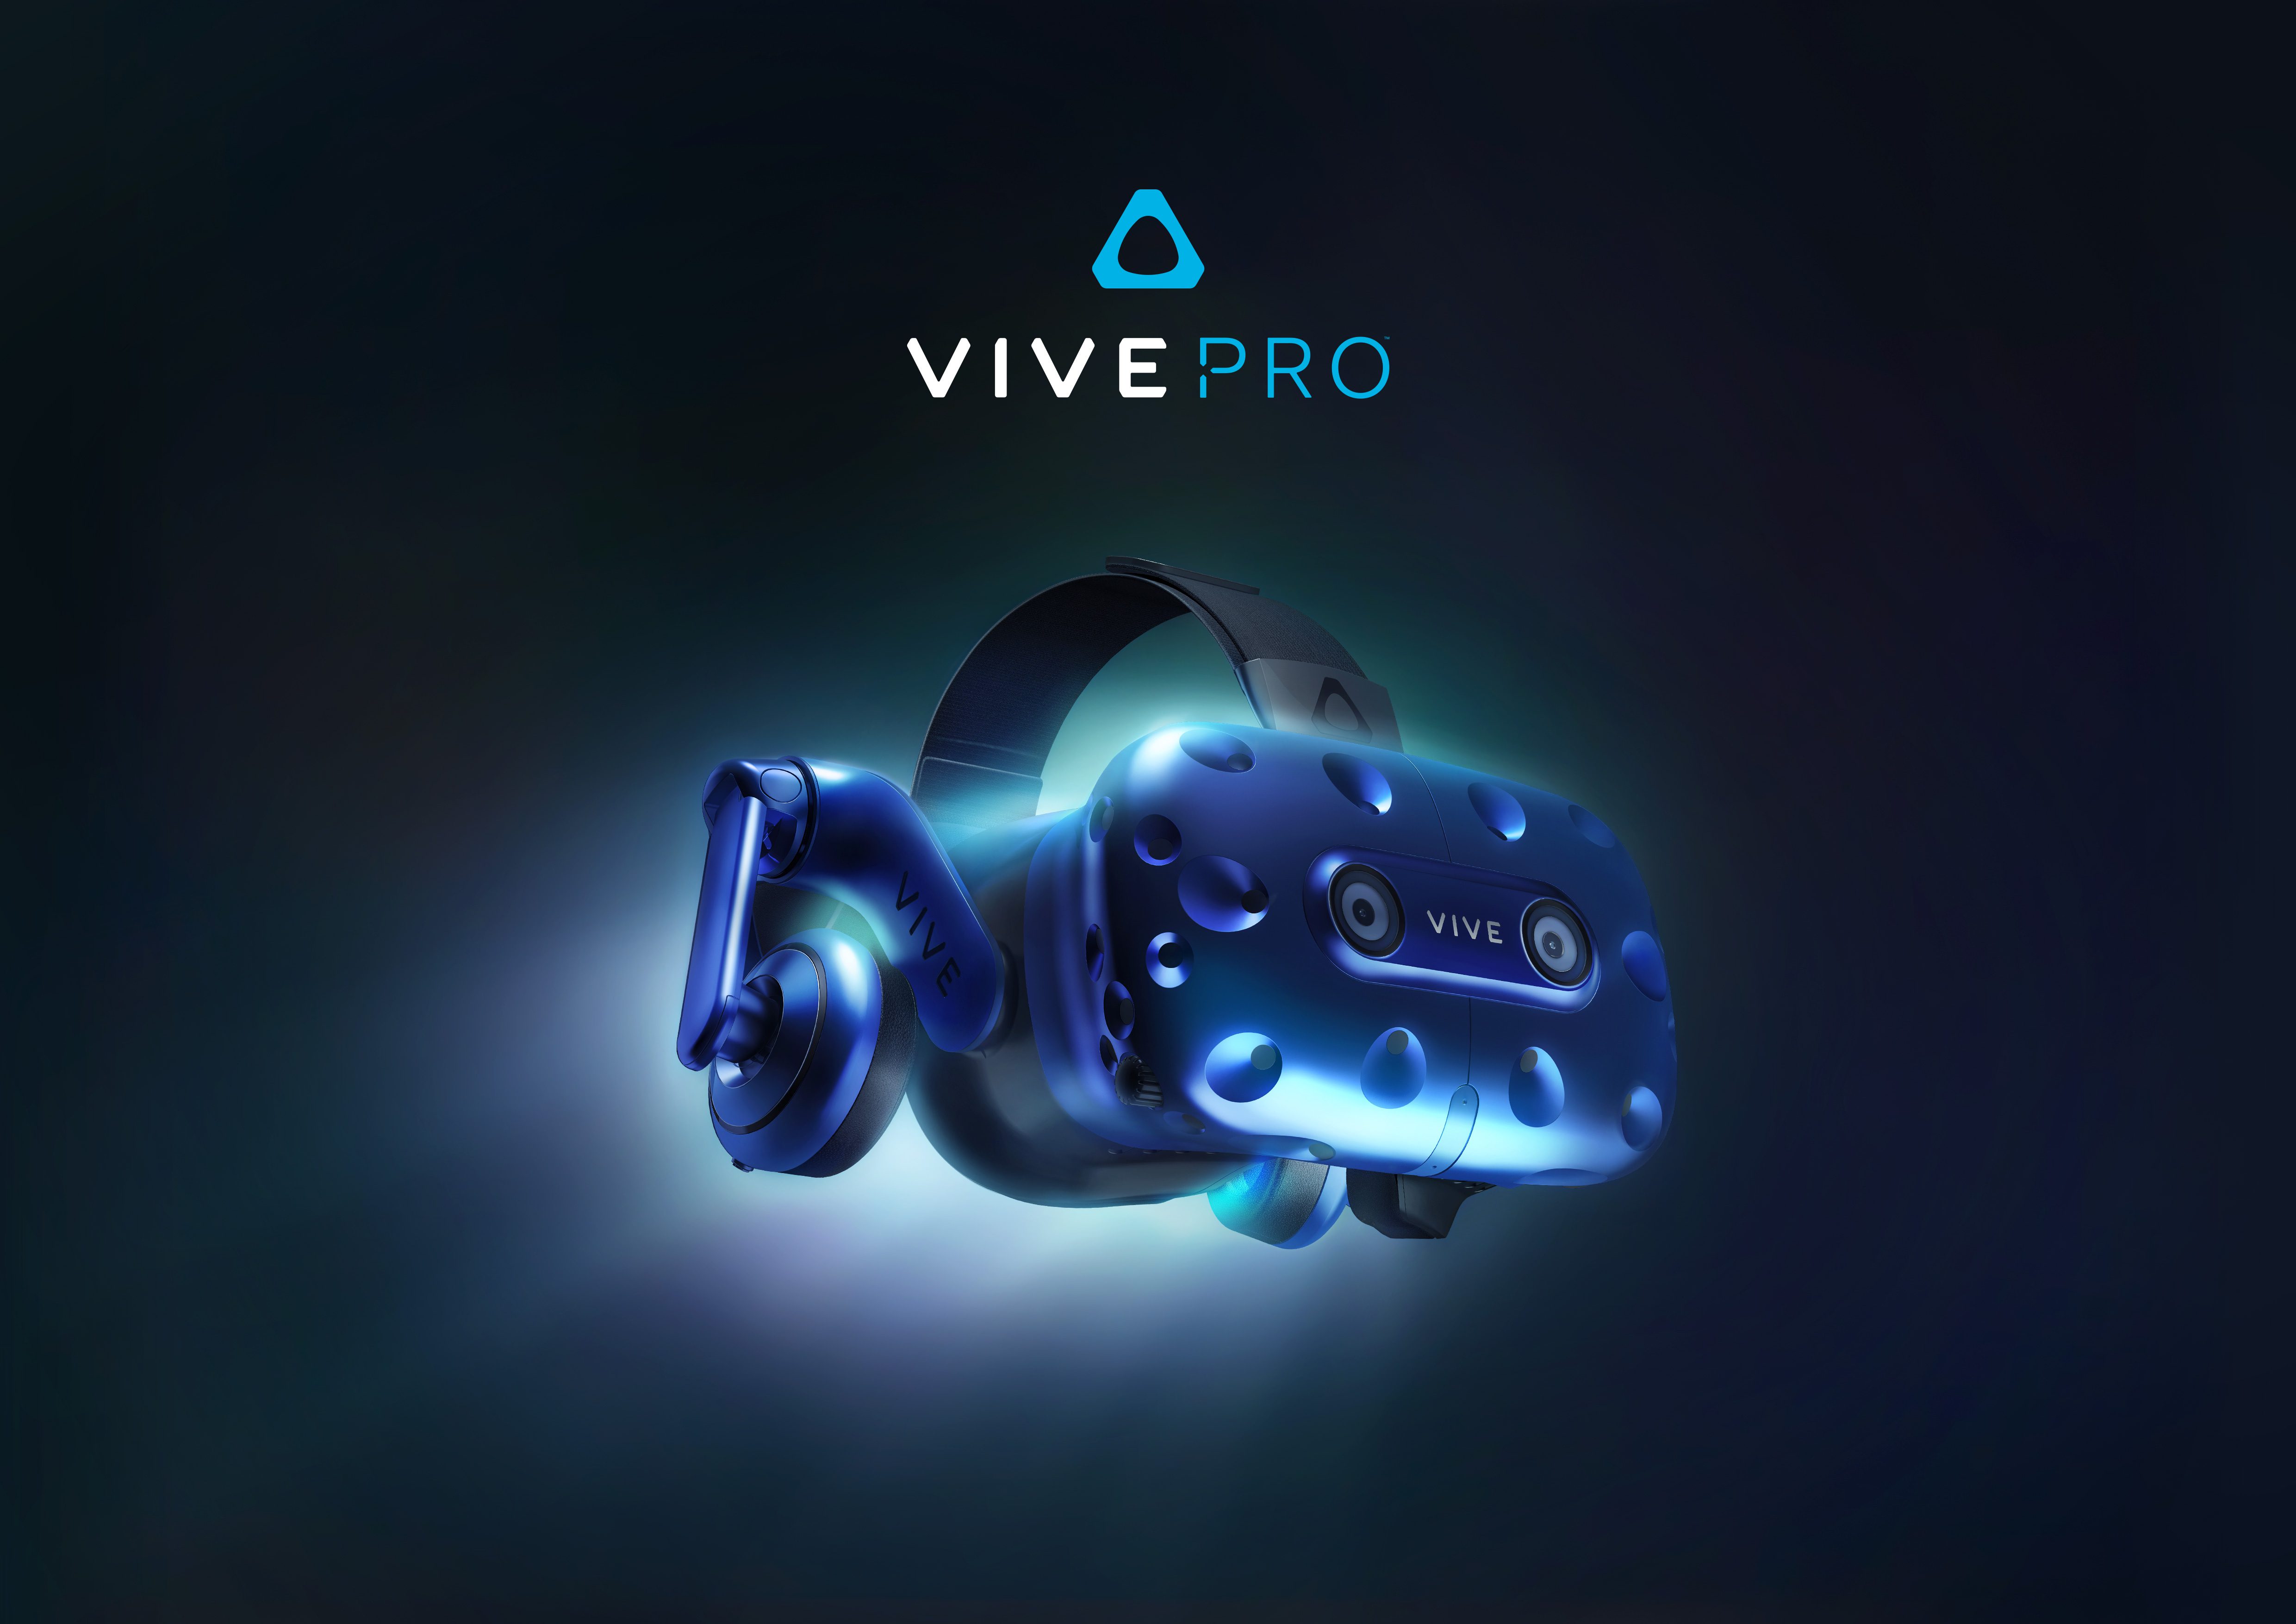 HTC VIVE RAISES THE BAR FOR PREMIUM VR WITH NEW VIVE PRO UPGRADE AND